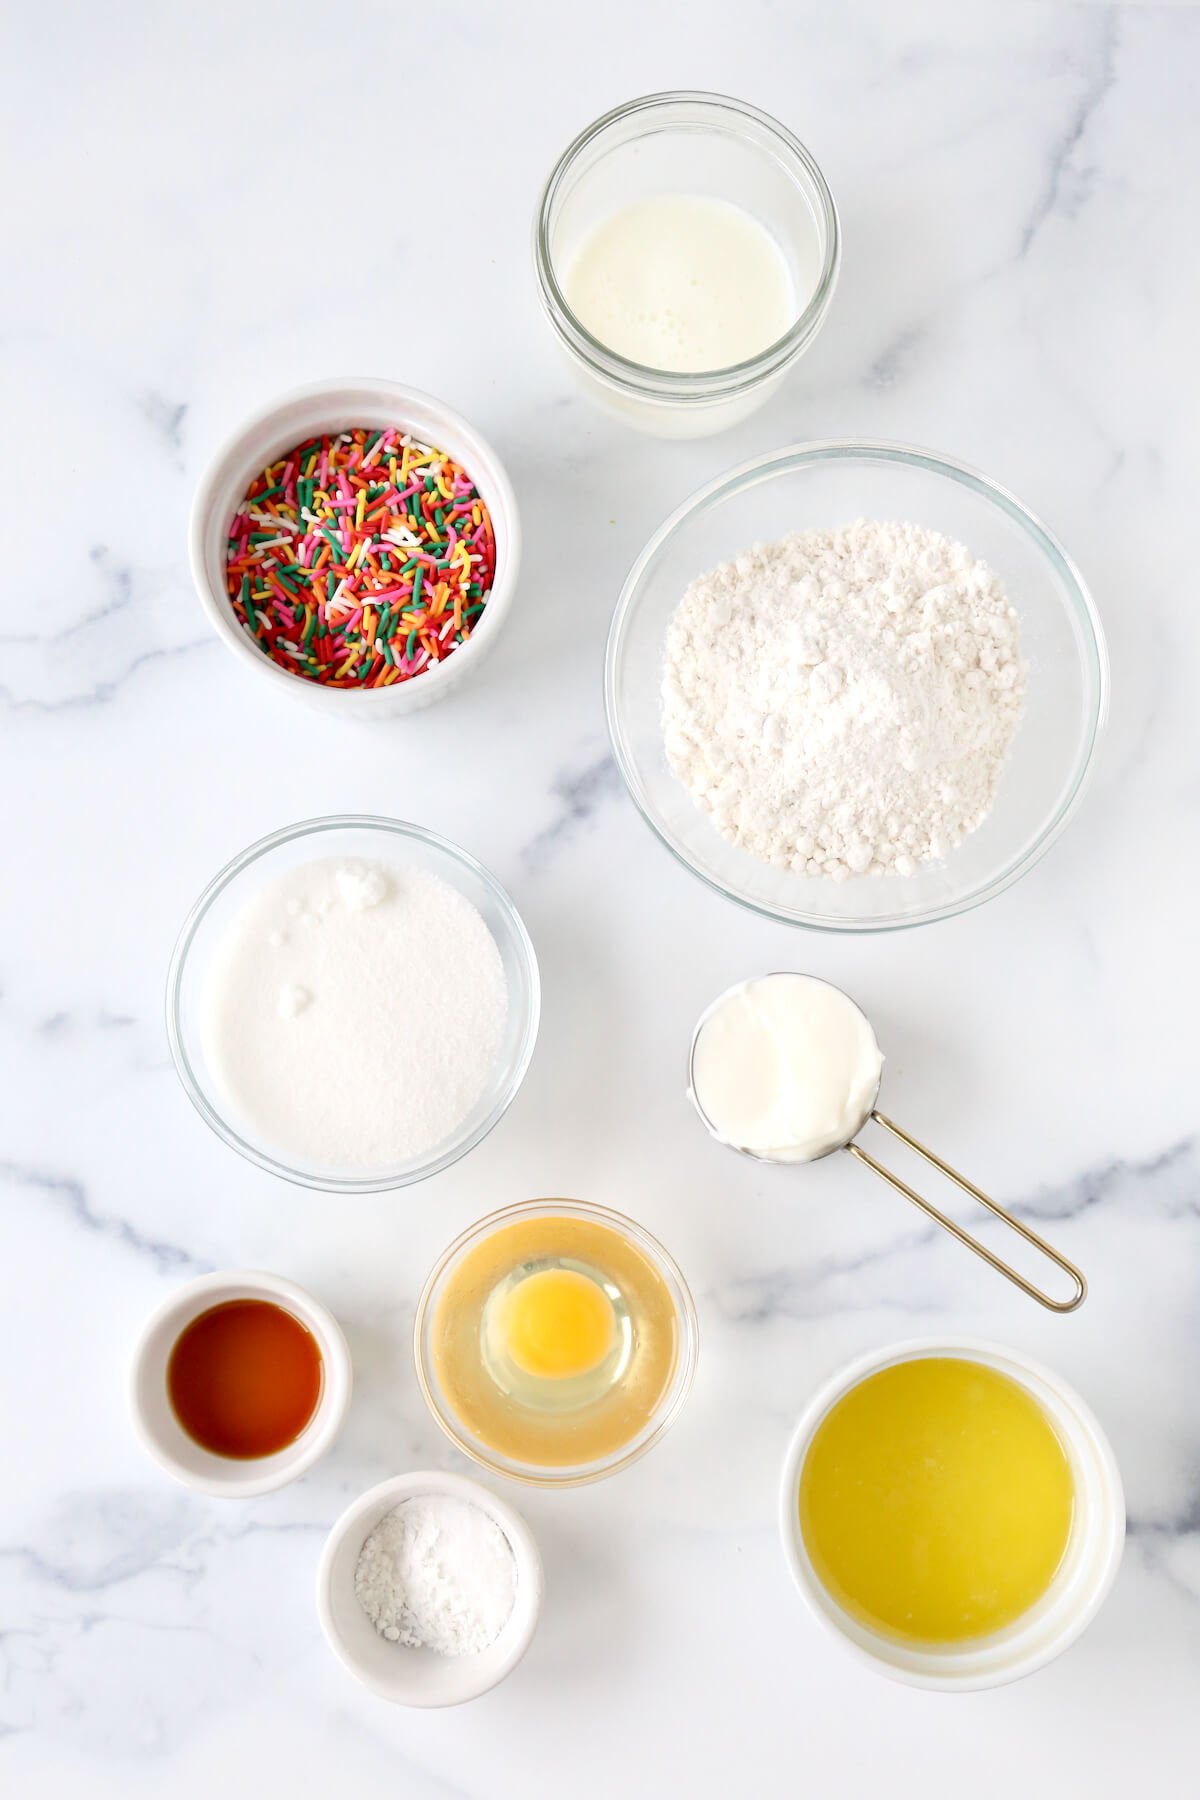 Bowls of flour, sugar, buttermilk, melted butter, one egg, vanilla extract and rainbow sprinkles.